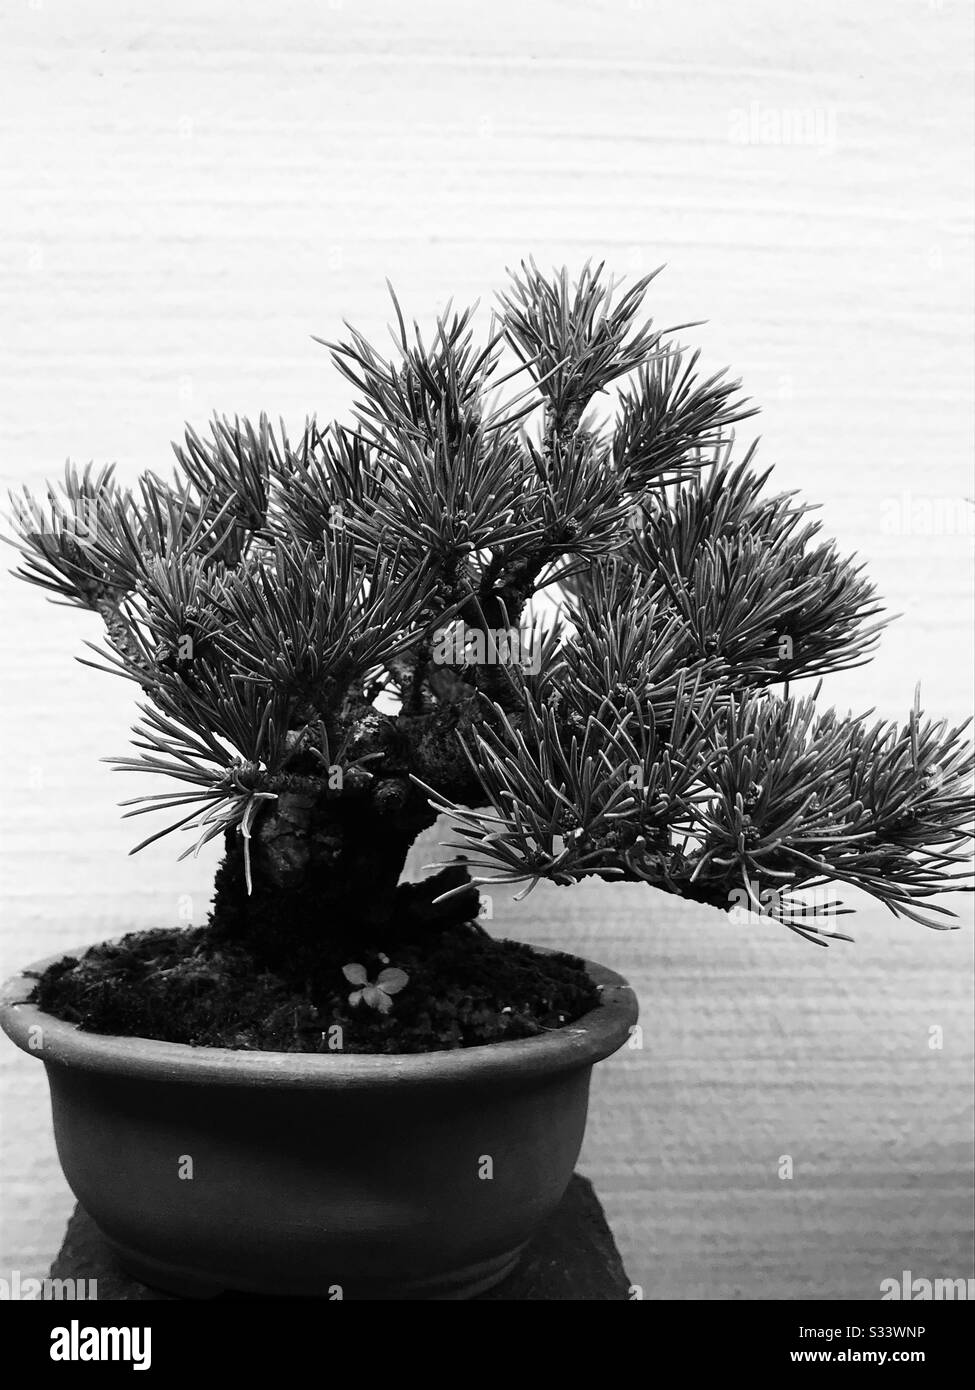 Pinus pentaphylla bonsai on a table kept outdoor- black & white image- close up pic of pine tree Stock Photo